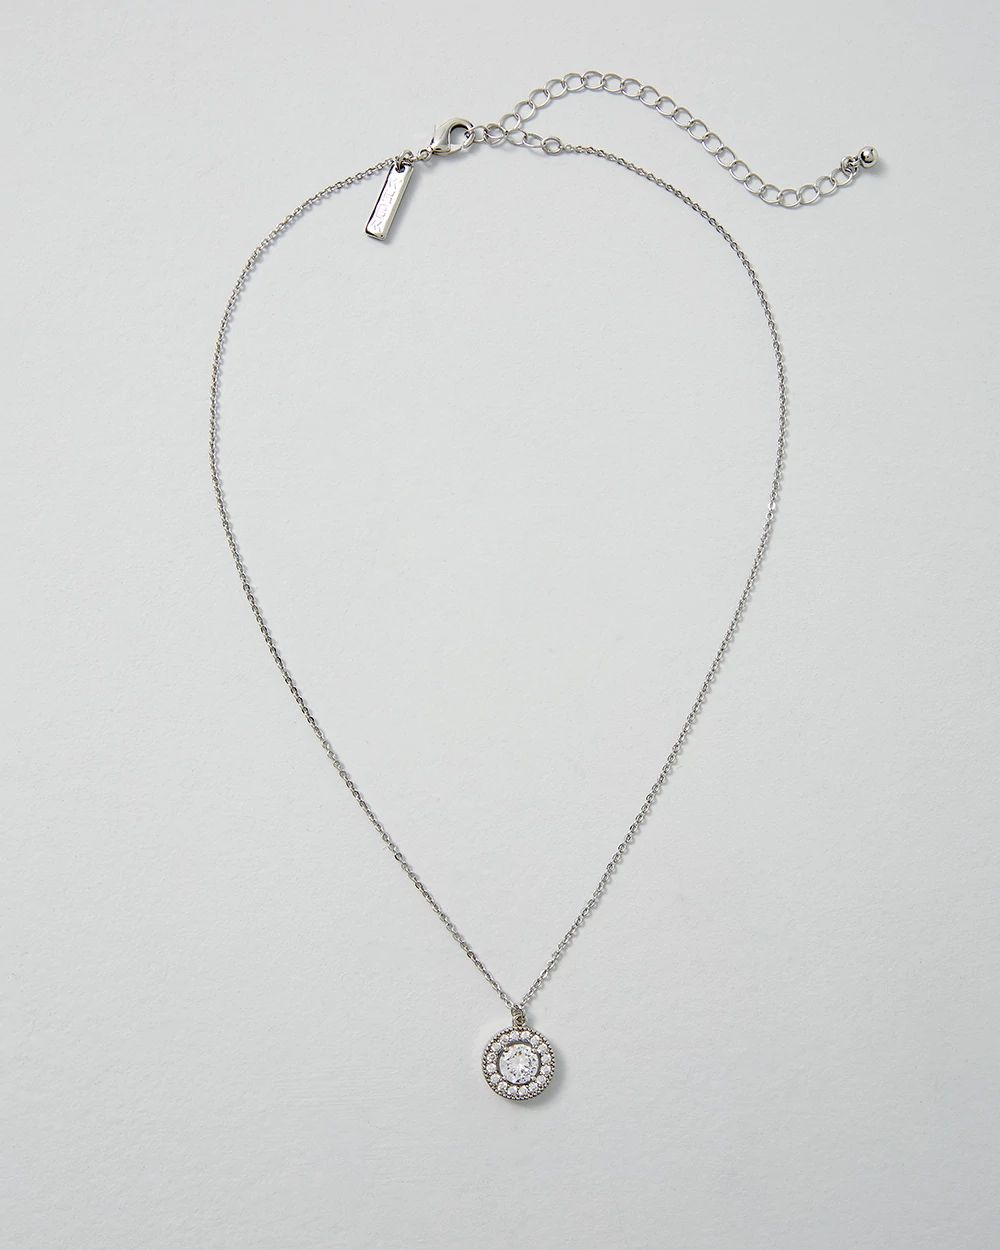 Silvertone Crystal Pendant Necklace click to view larger image.